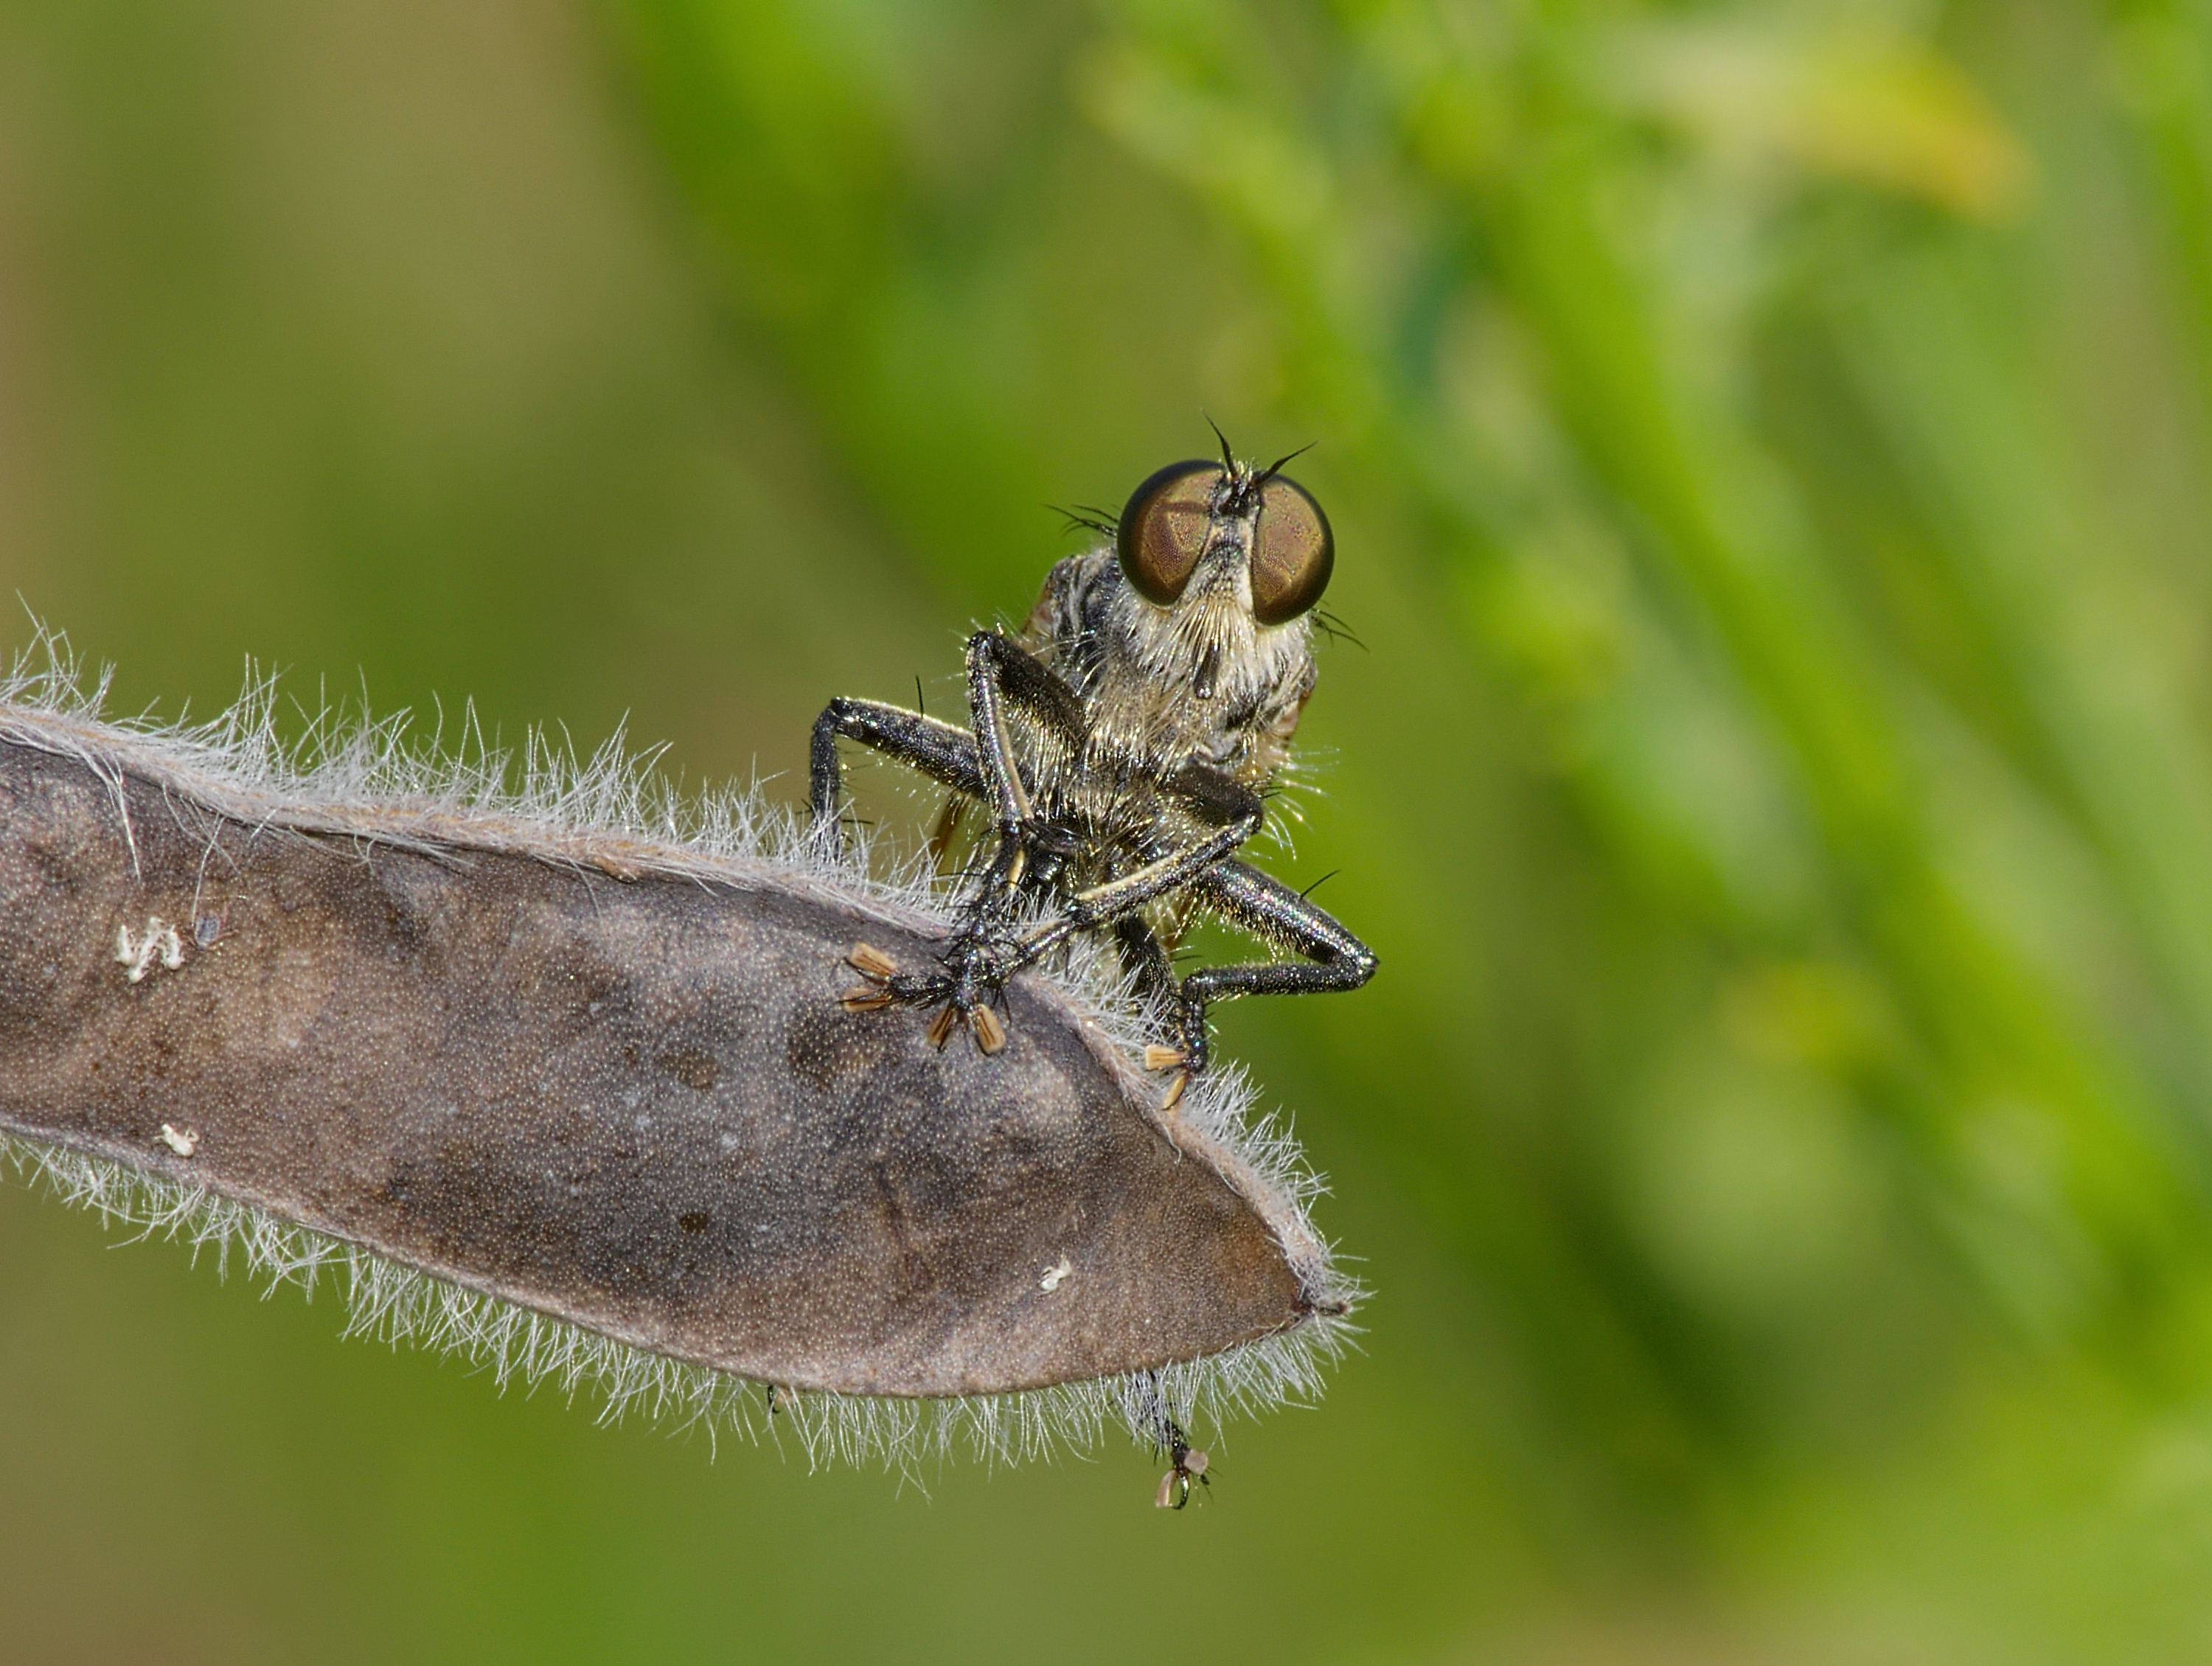 Robber Fly (Asilidae species) by Andreas Eichler